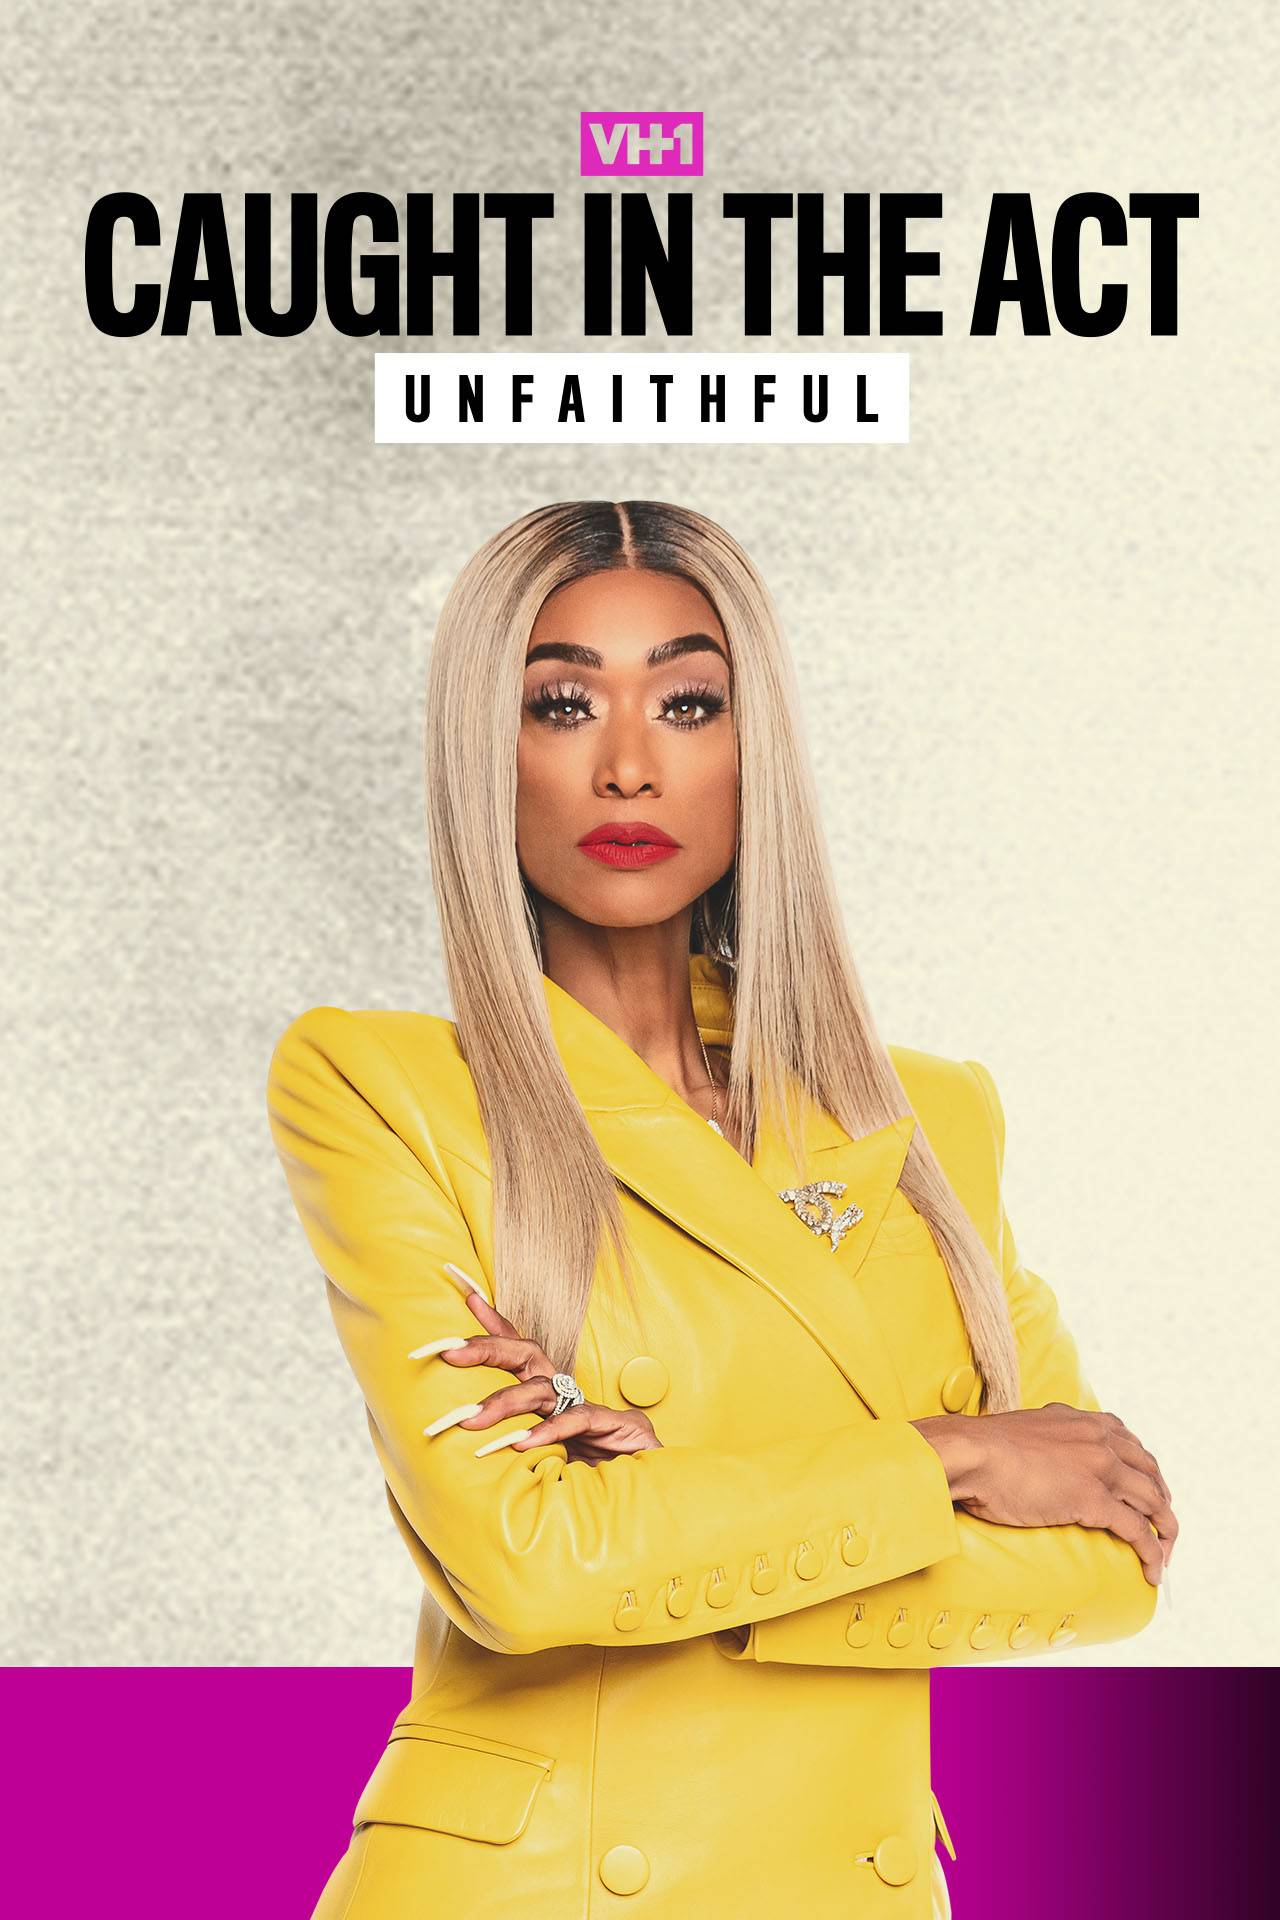 MTV's "Tuesday Night Takeover" Heats Up with an All-New Season of "Caught in the Act: Unfaithful"